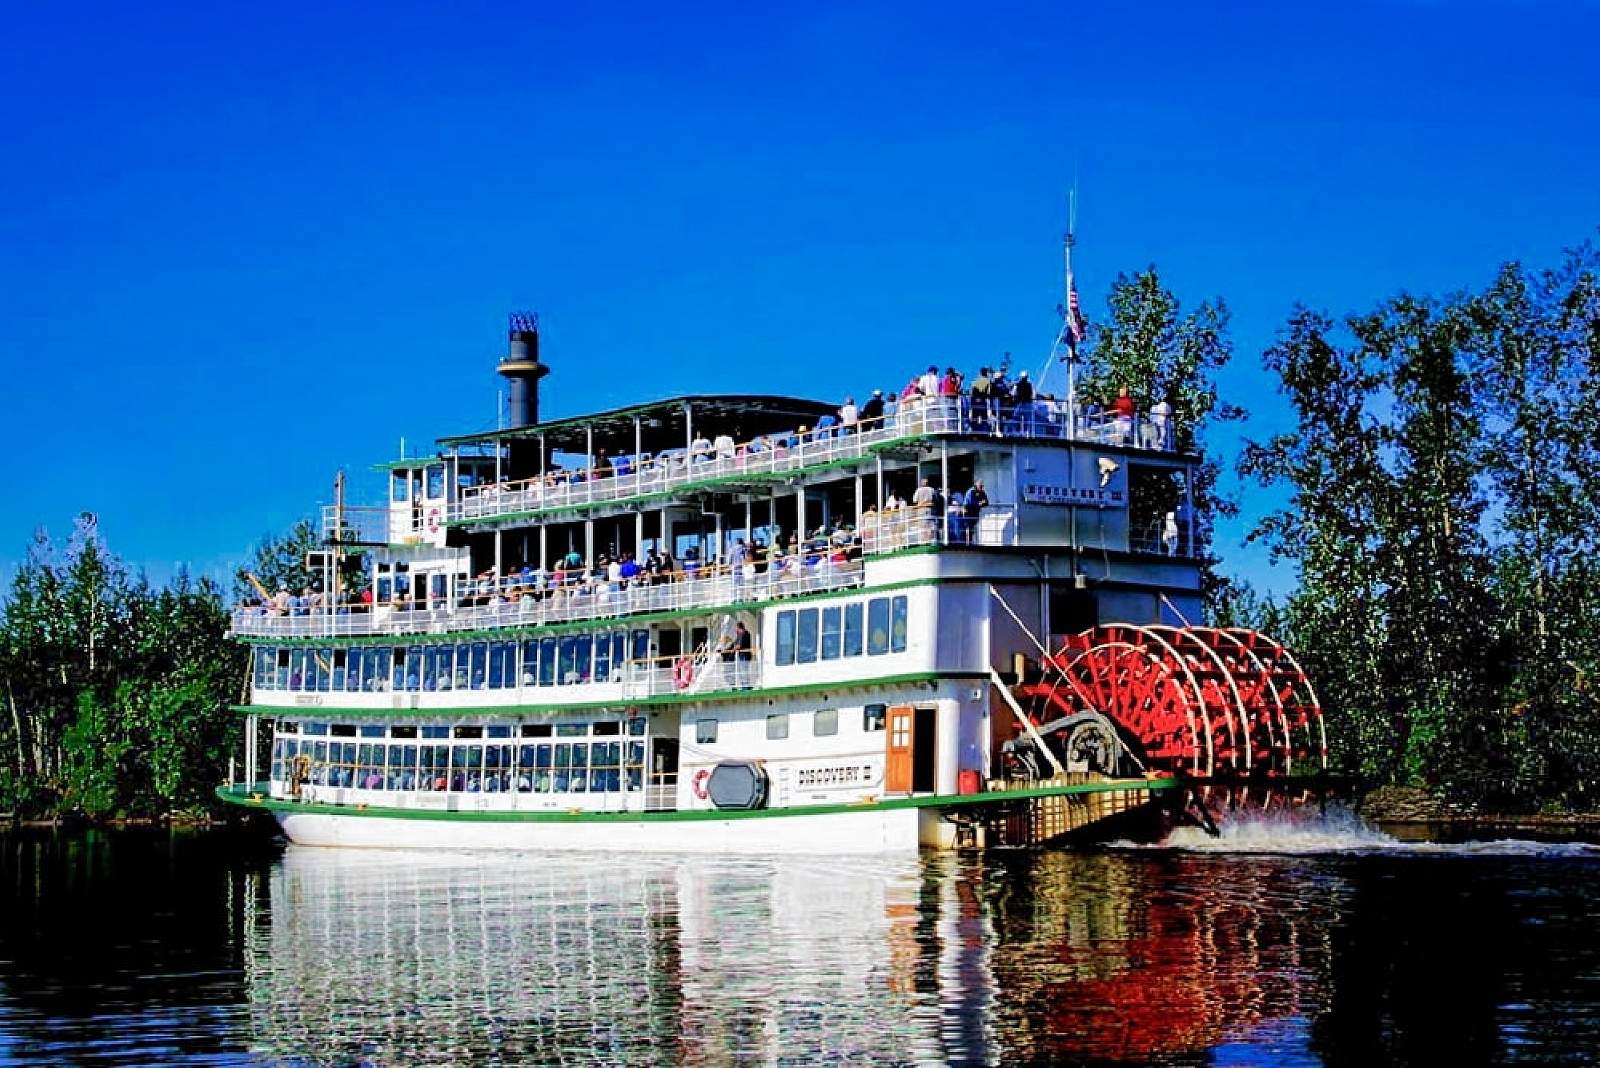 https://uploads.alaska.org/suppliers/activities/R/riverboat-discovery/_1600xAUTO_crop_center-center_65_none/riverboat-discovery-5.jpg